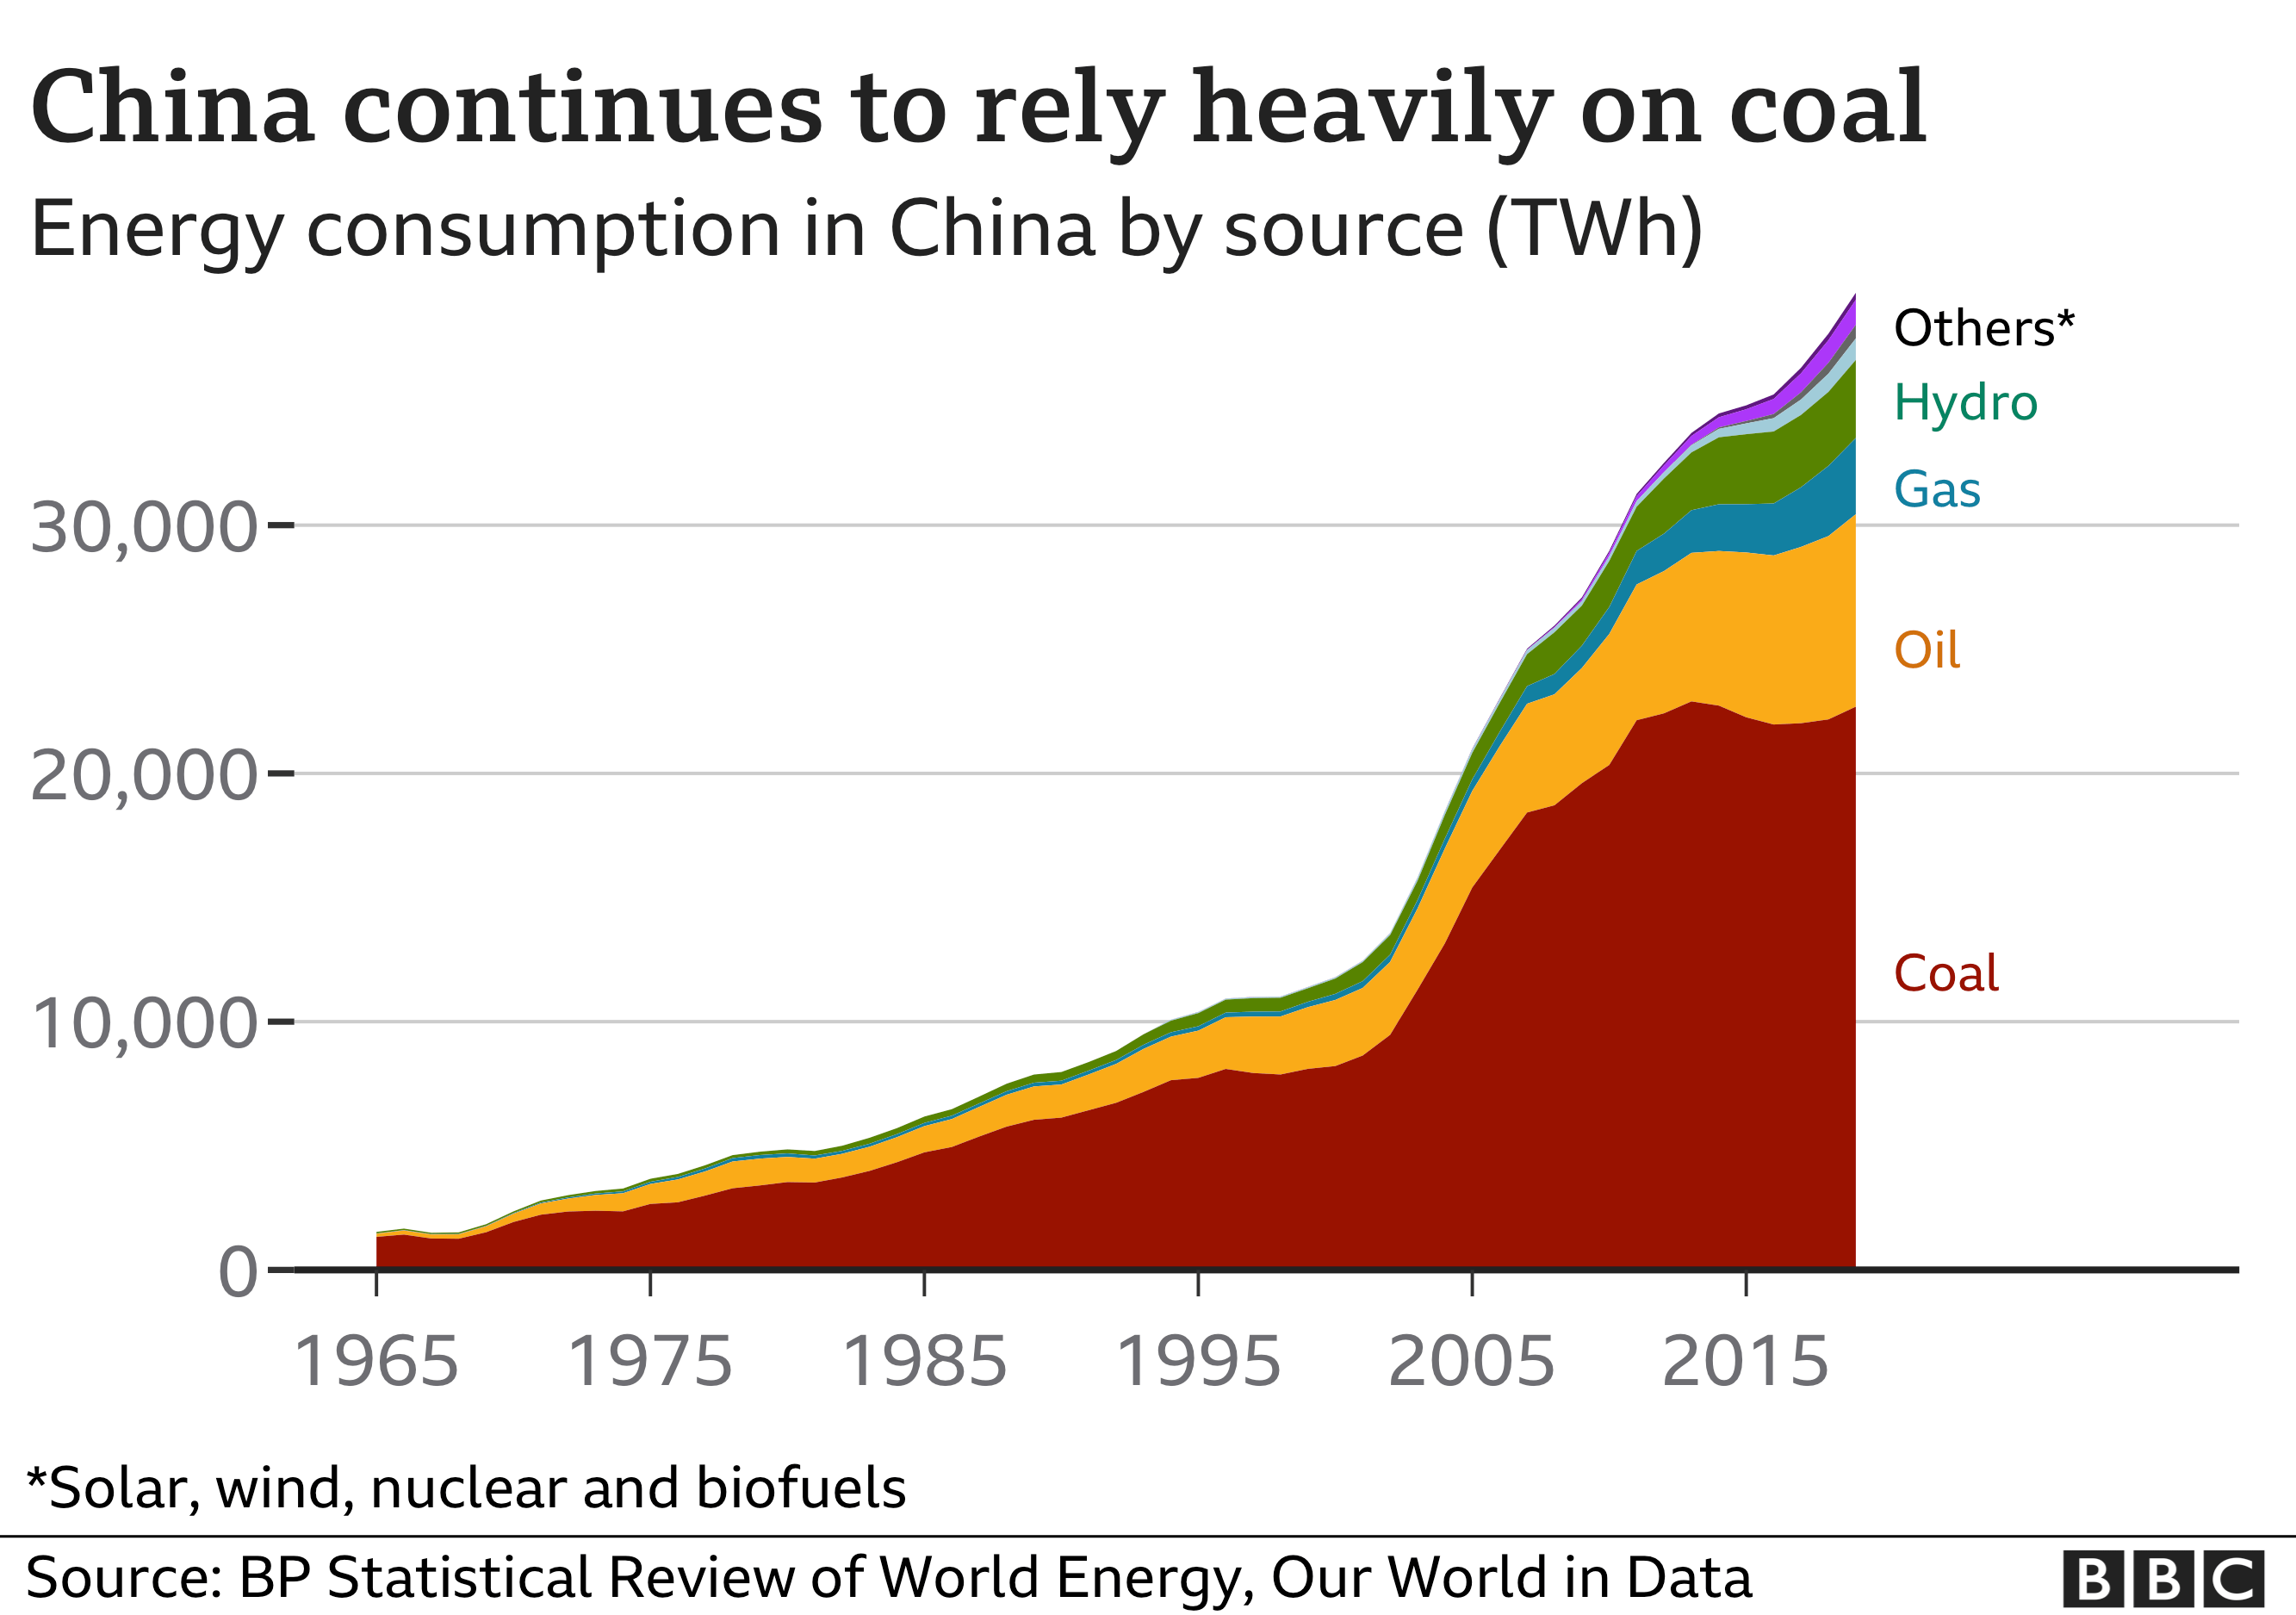 Chart showing China's dependence on coal